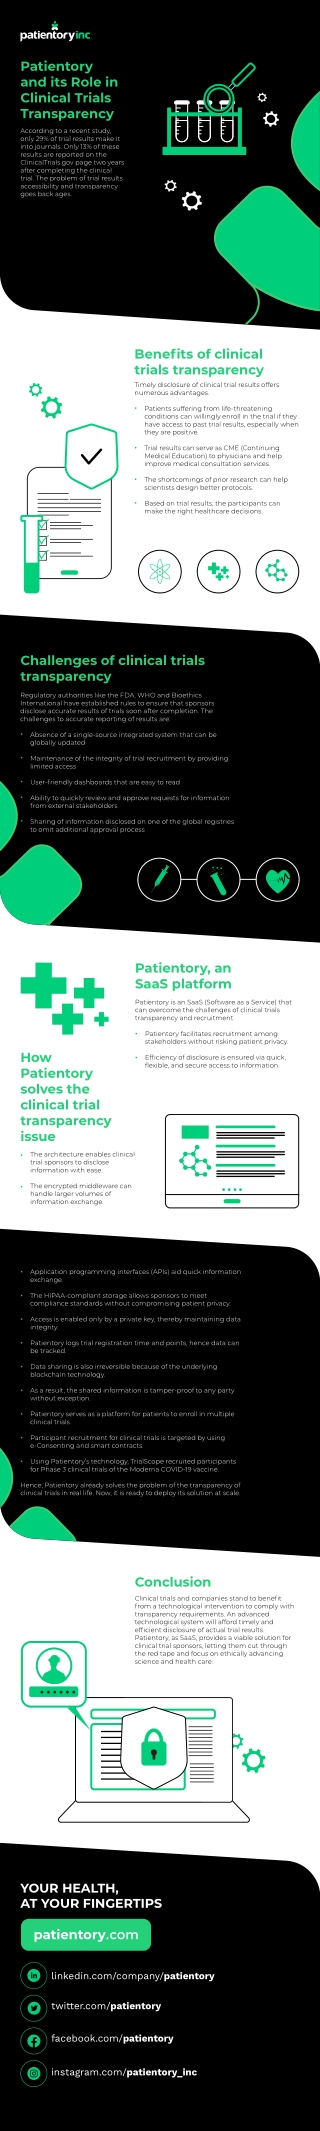 Patientory and its Role in Clinical Trials Transparency